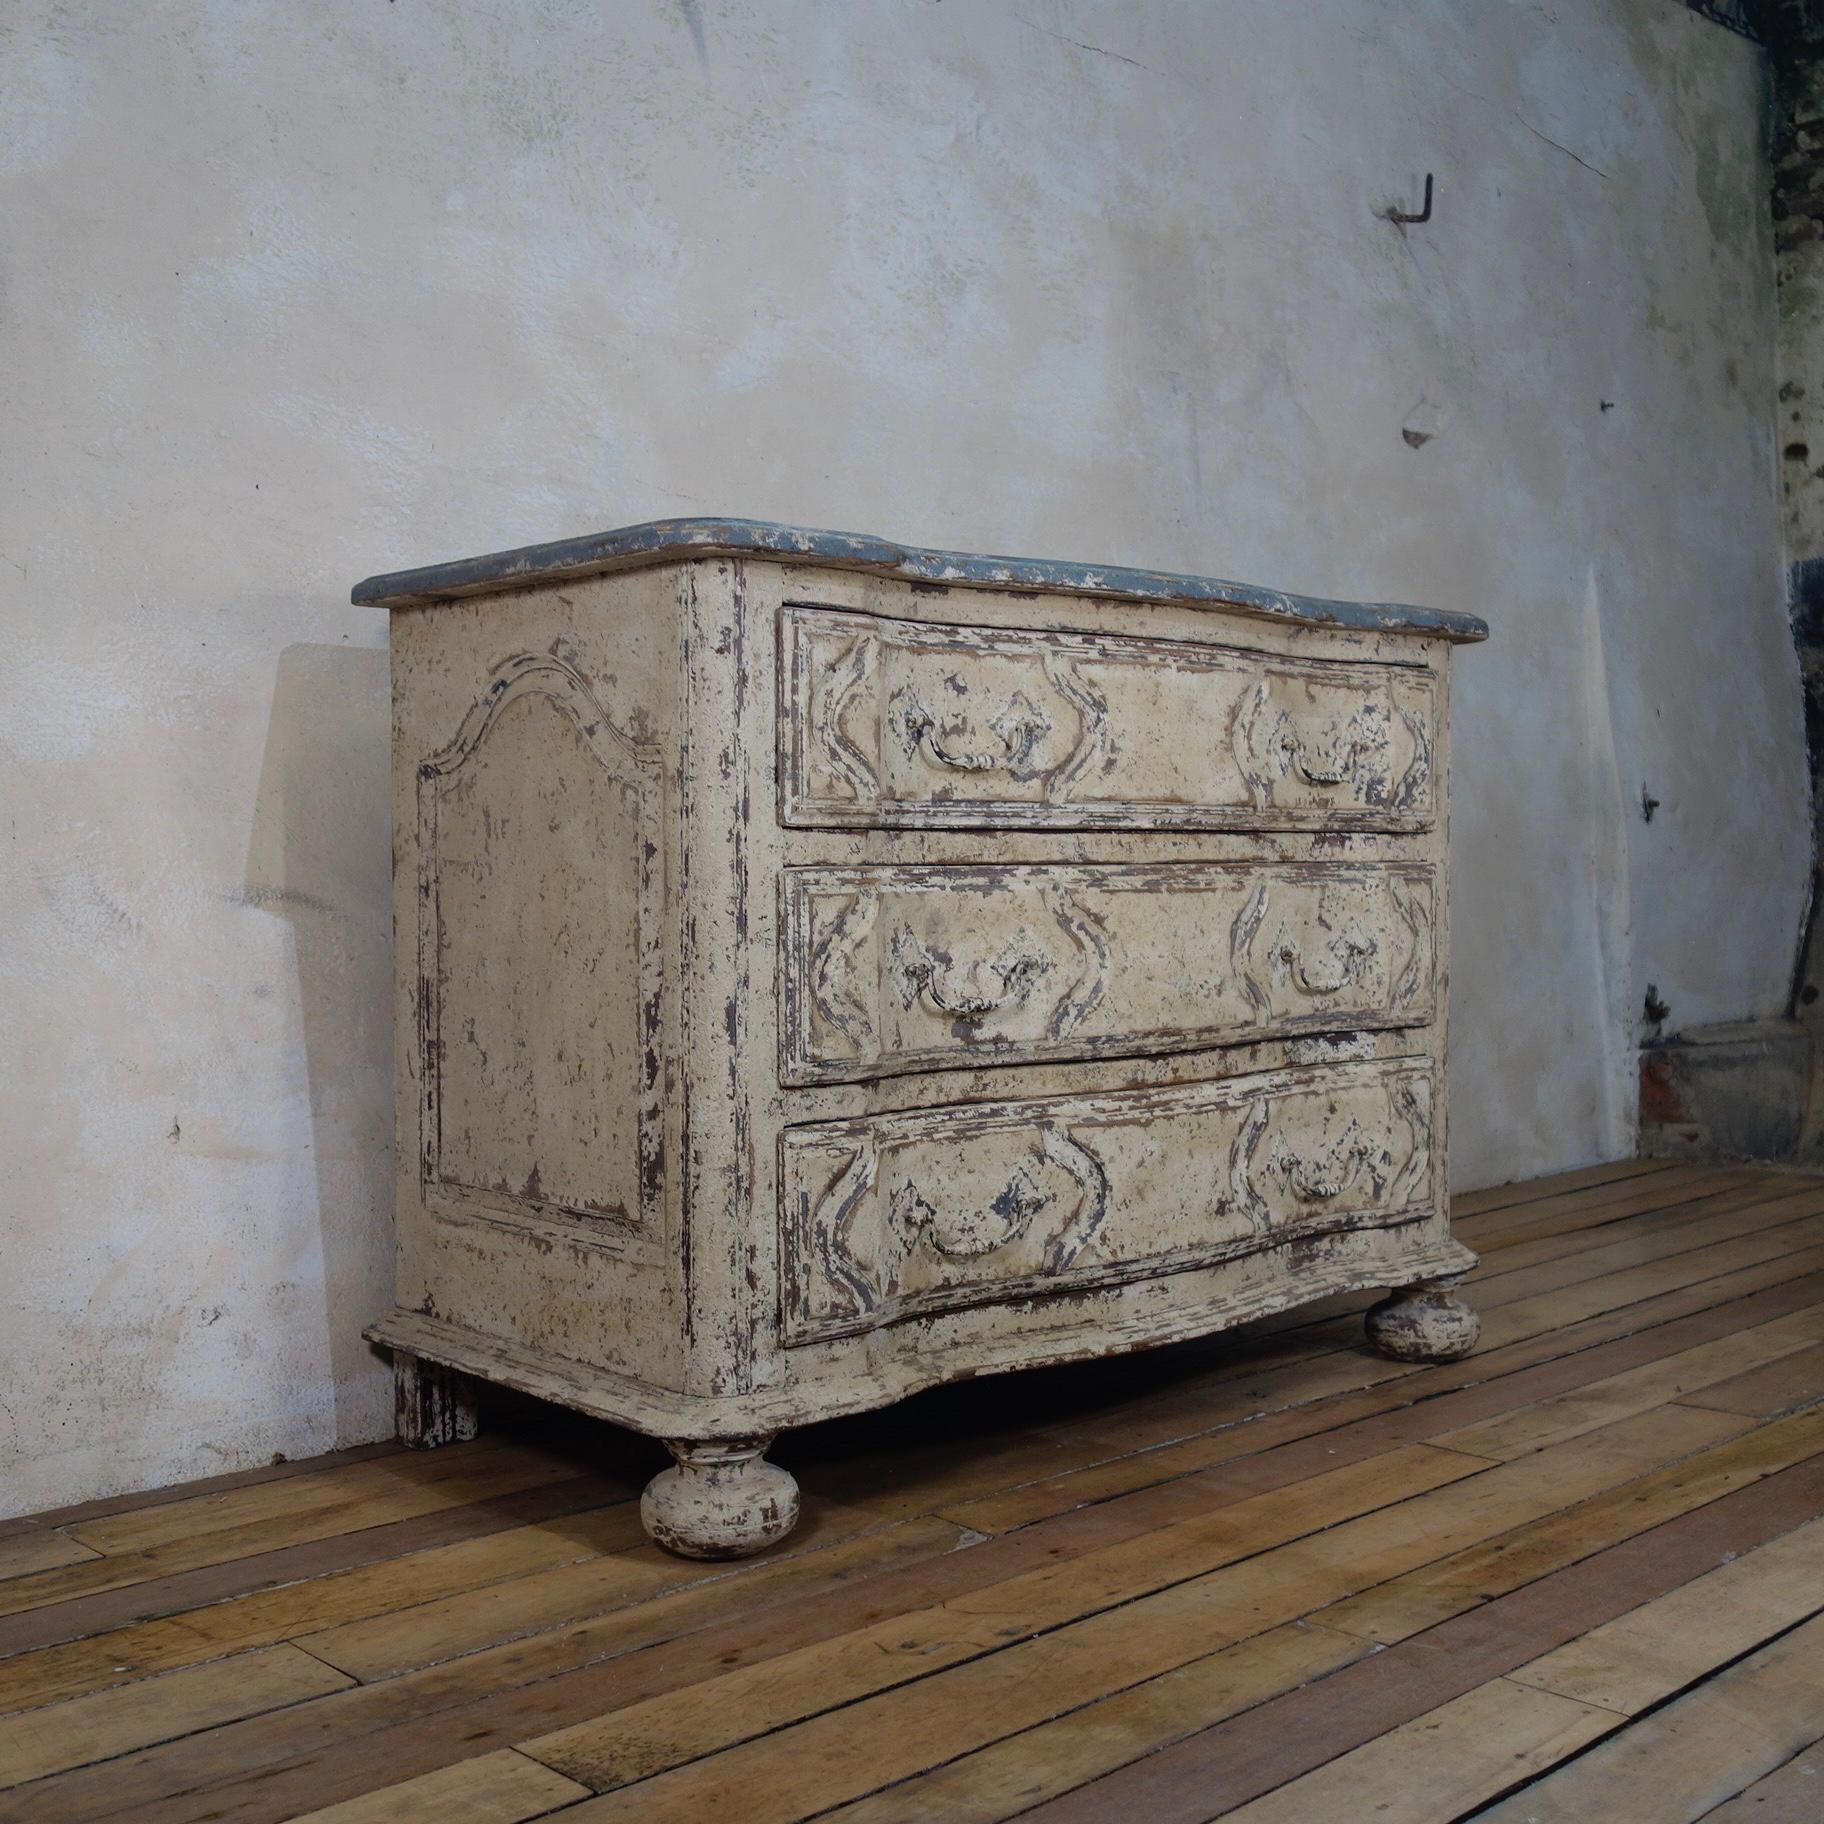 Striking early 20th century French oak serpentine commode, of great proportions displaying original paint. Demonstrating elegantly carved paneled sides and a graceful serpentine shaped front, raised on charming bun feet retaining its original